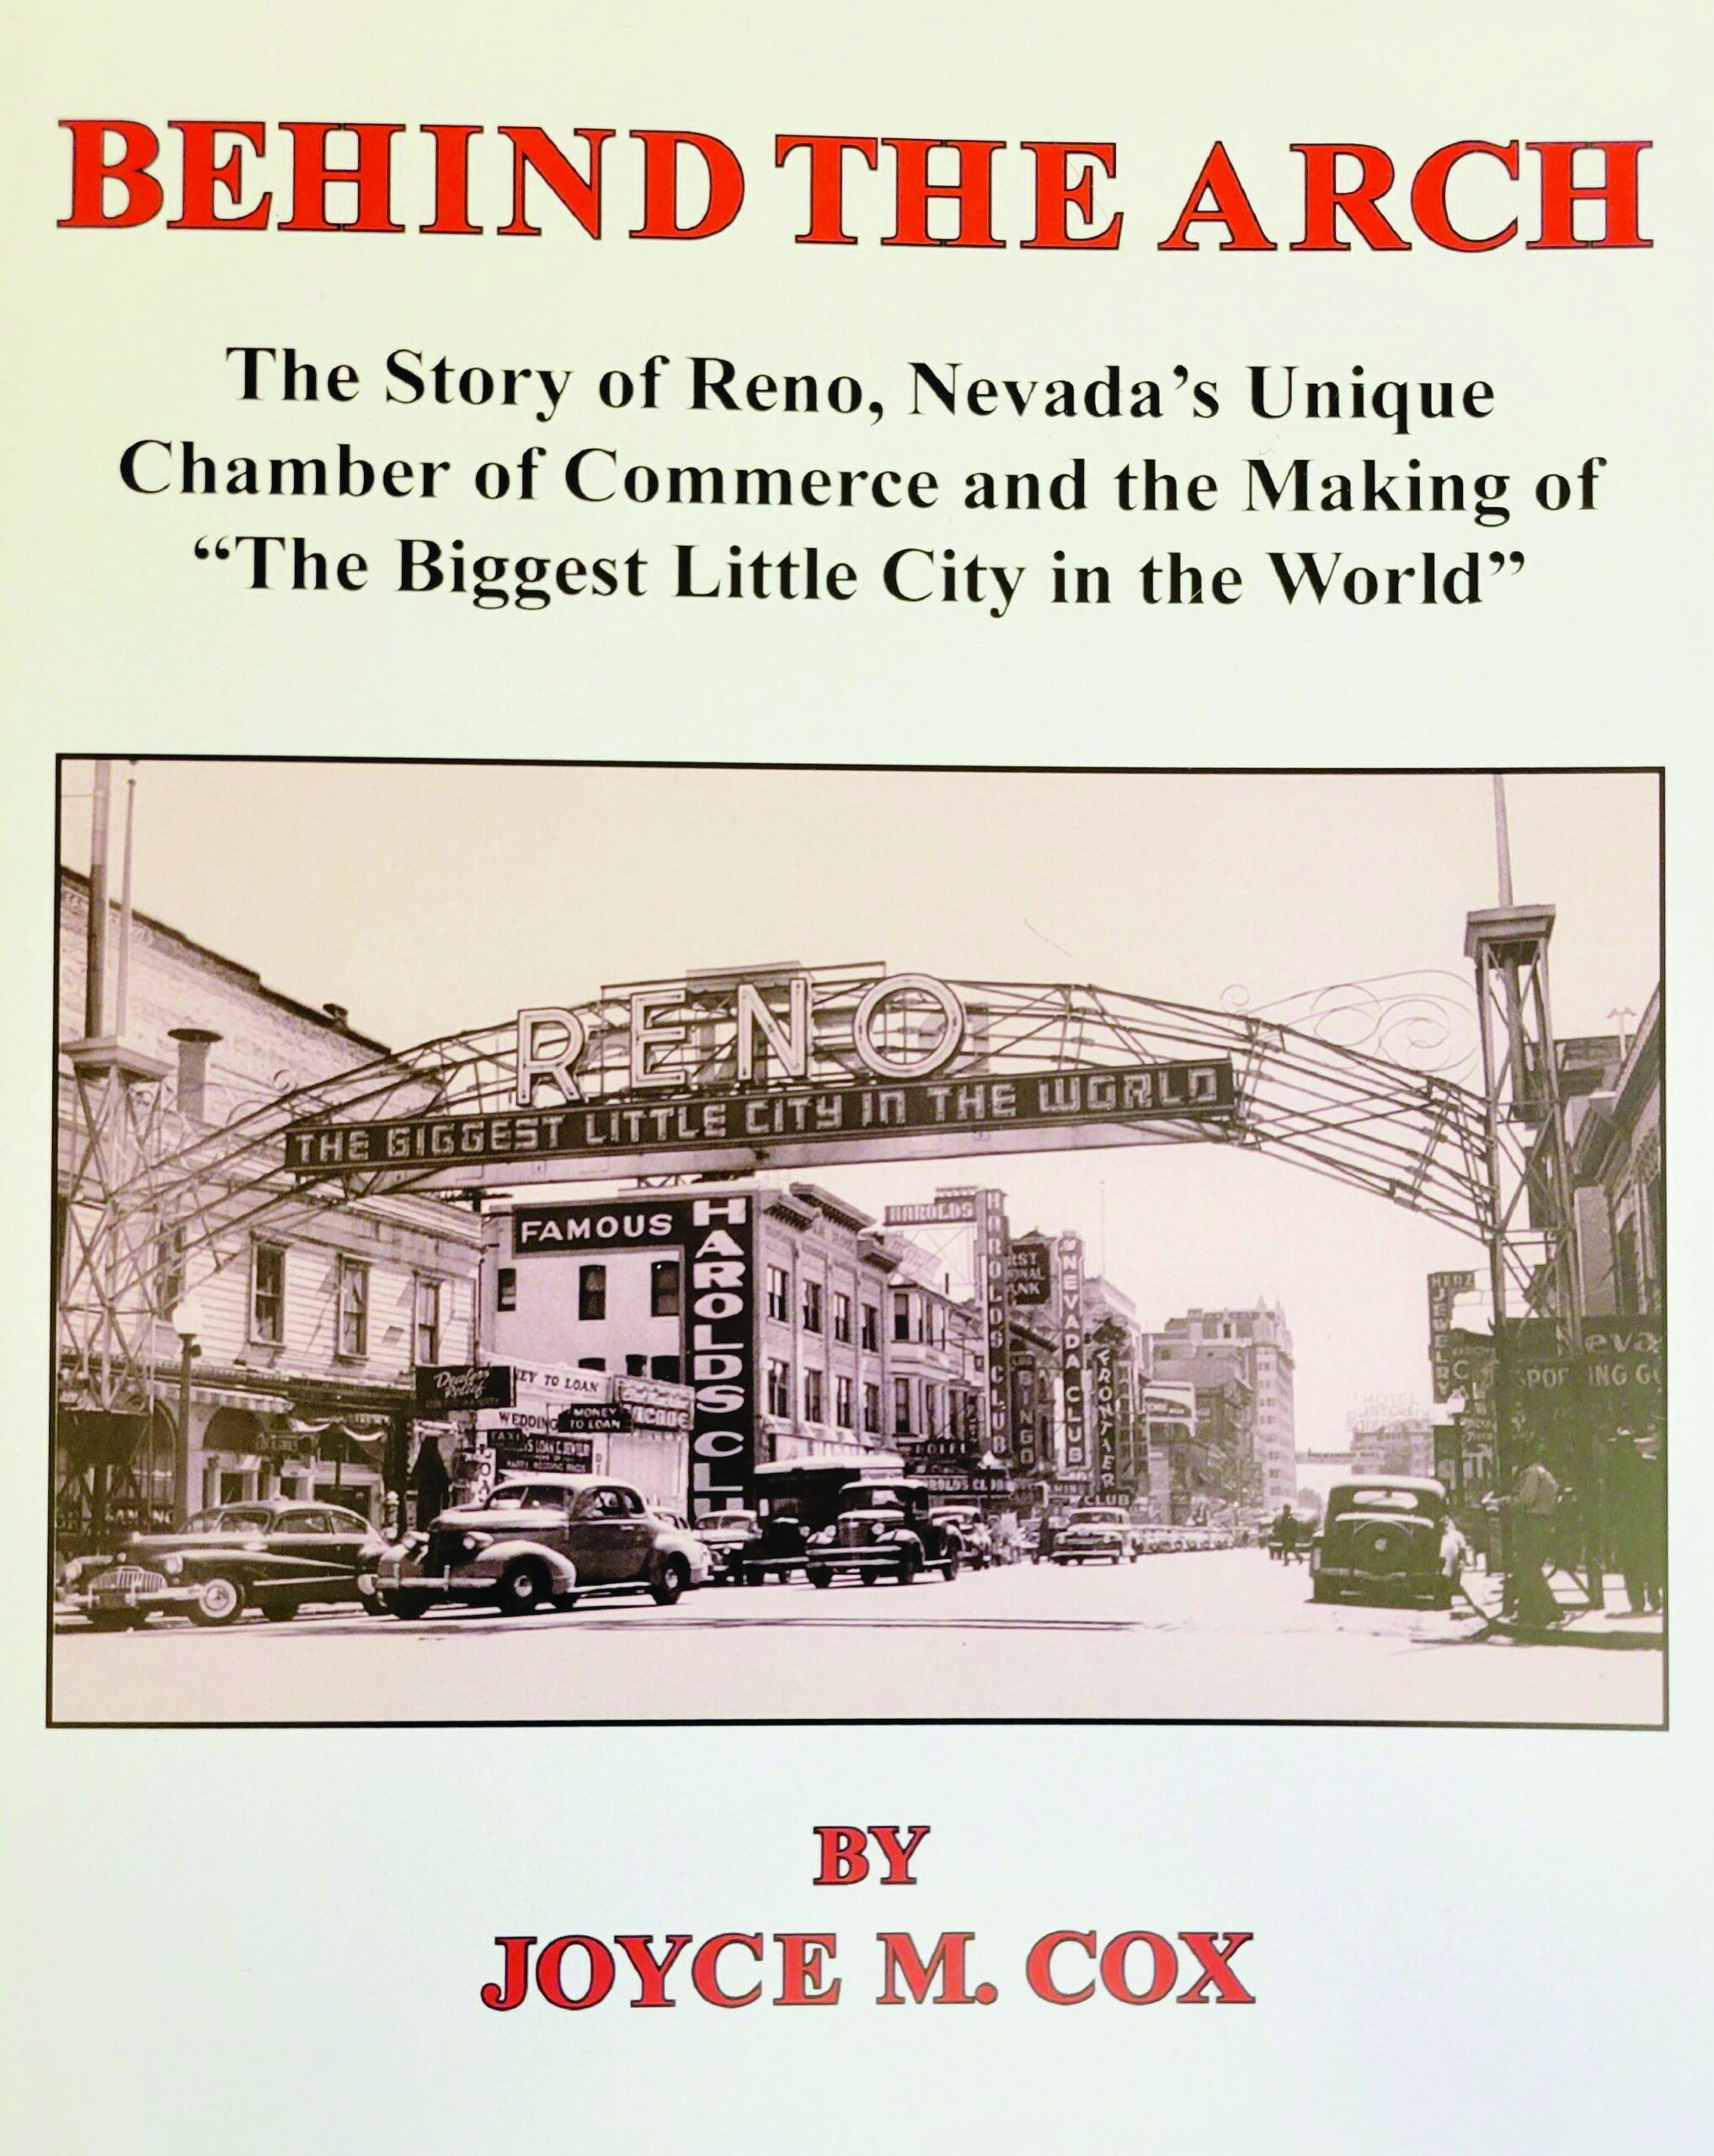 Nevada Traveler: Cox’s latest book tells how Reno made a name for itself